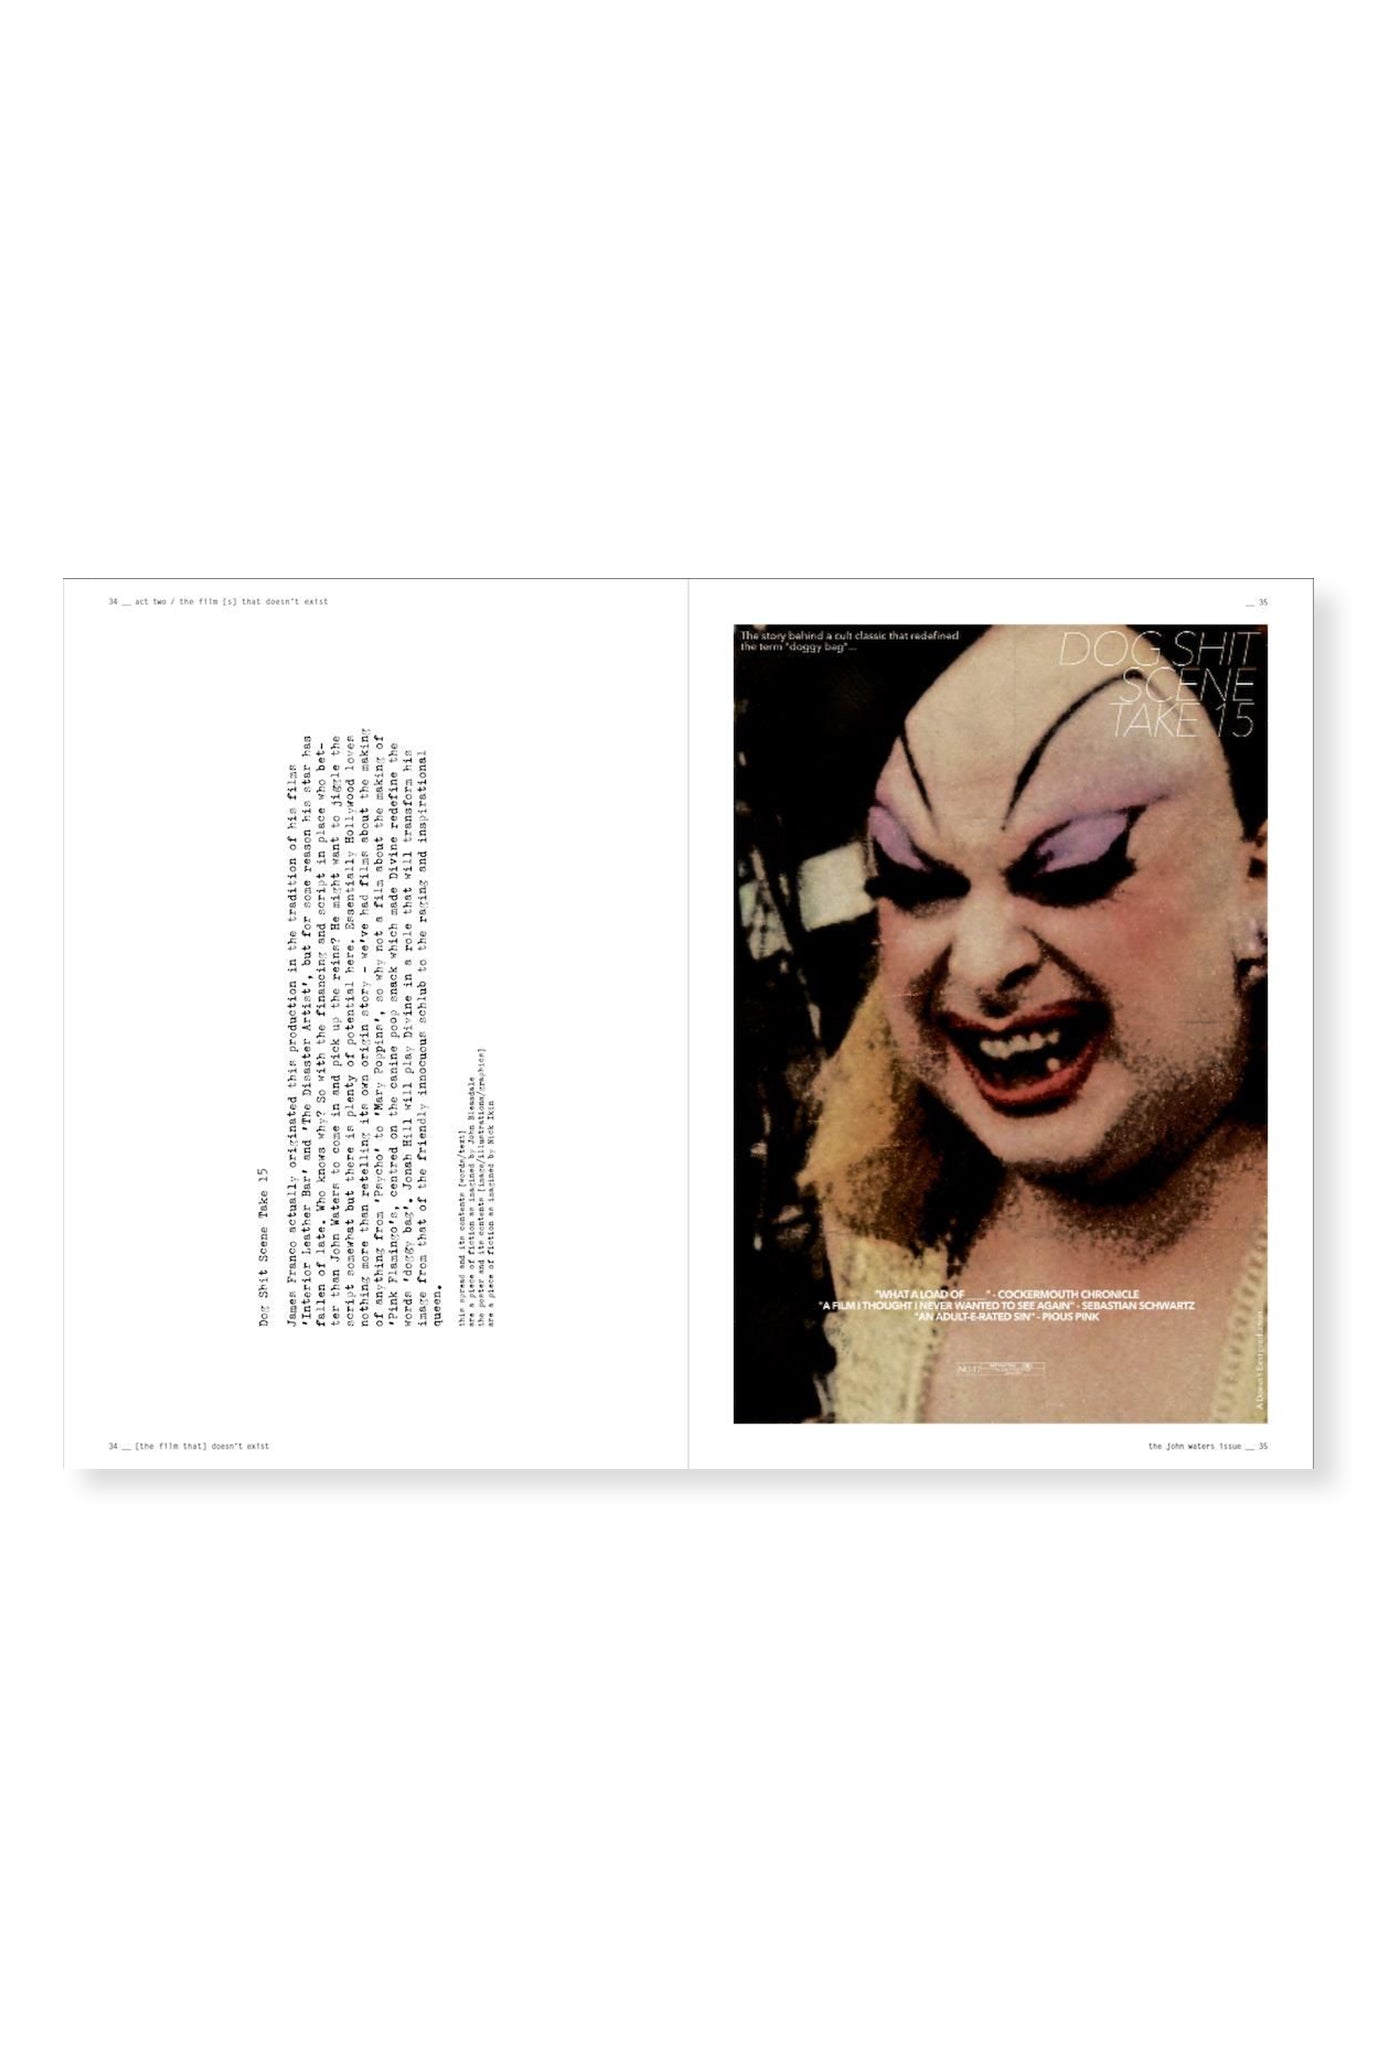 Doesn't Exist, Issue 4 - John Waters